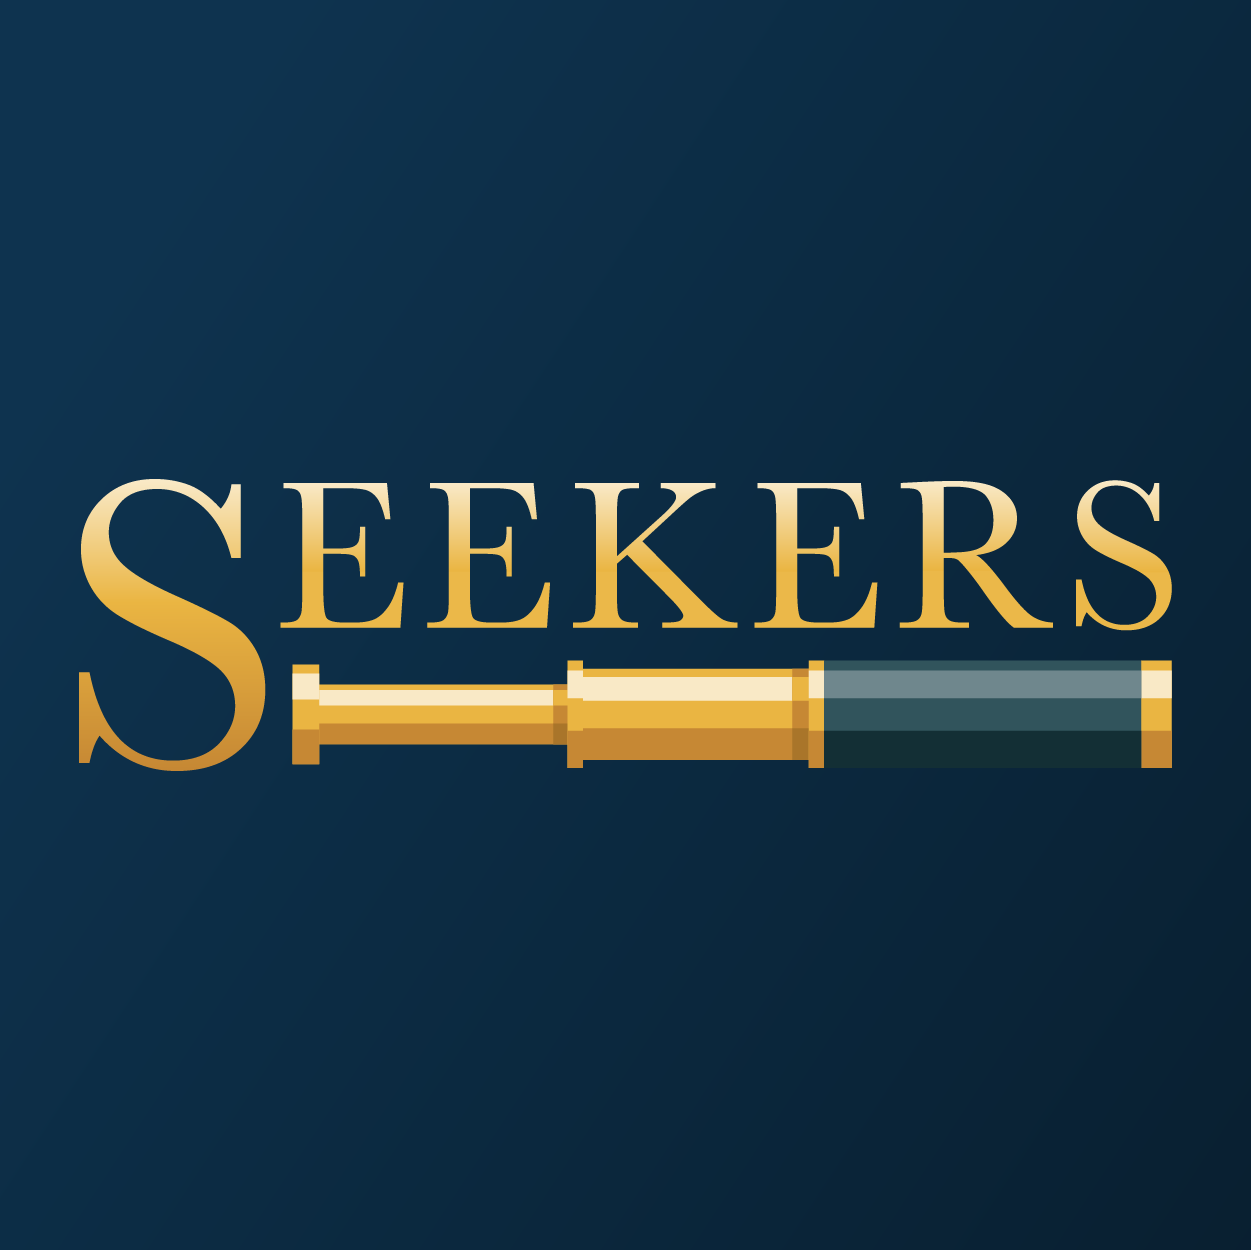 Featured image for “Seekers”